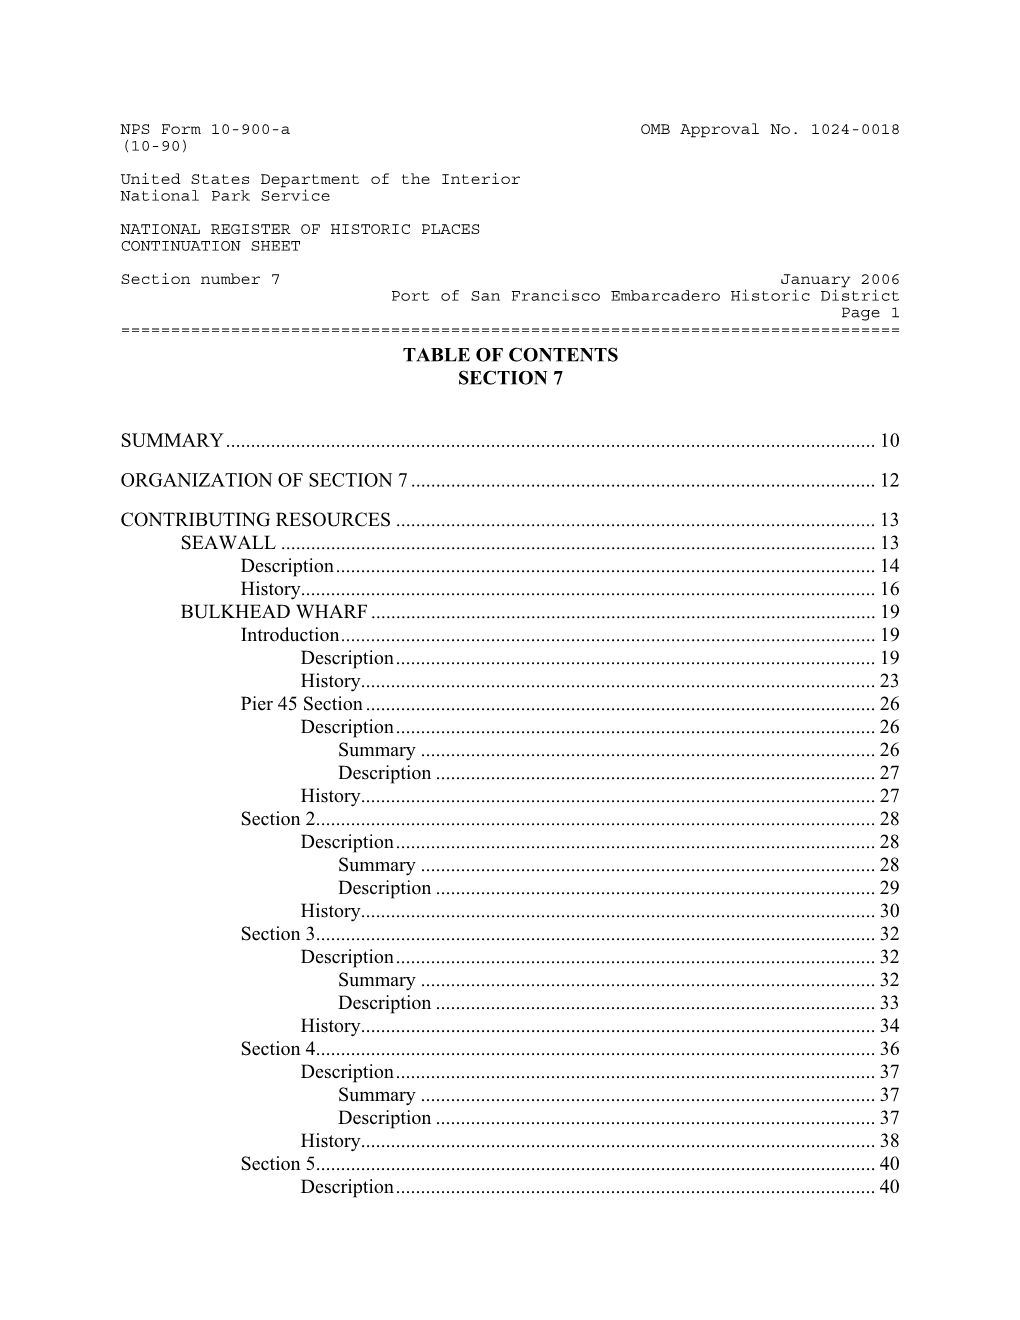 Table of Contents Section 7